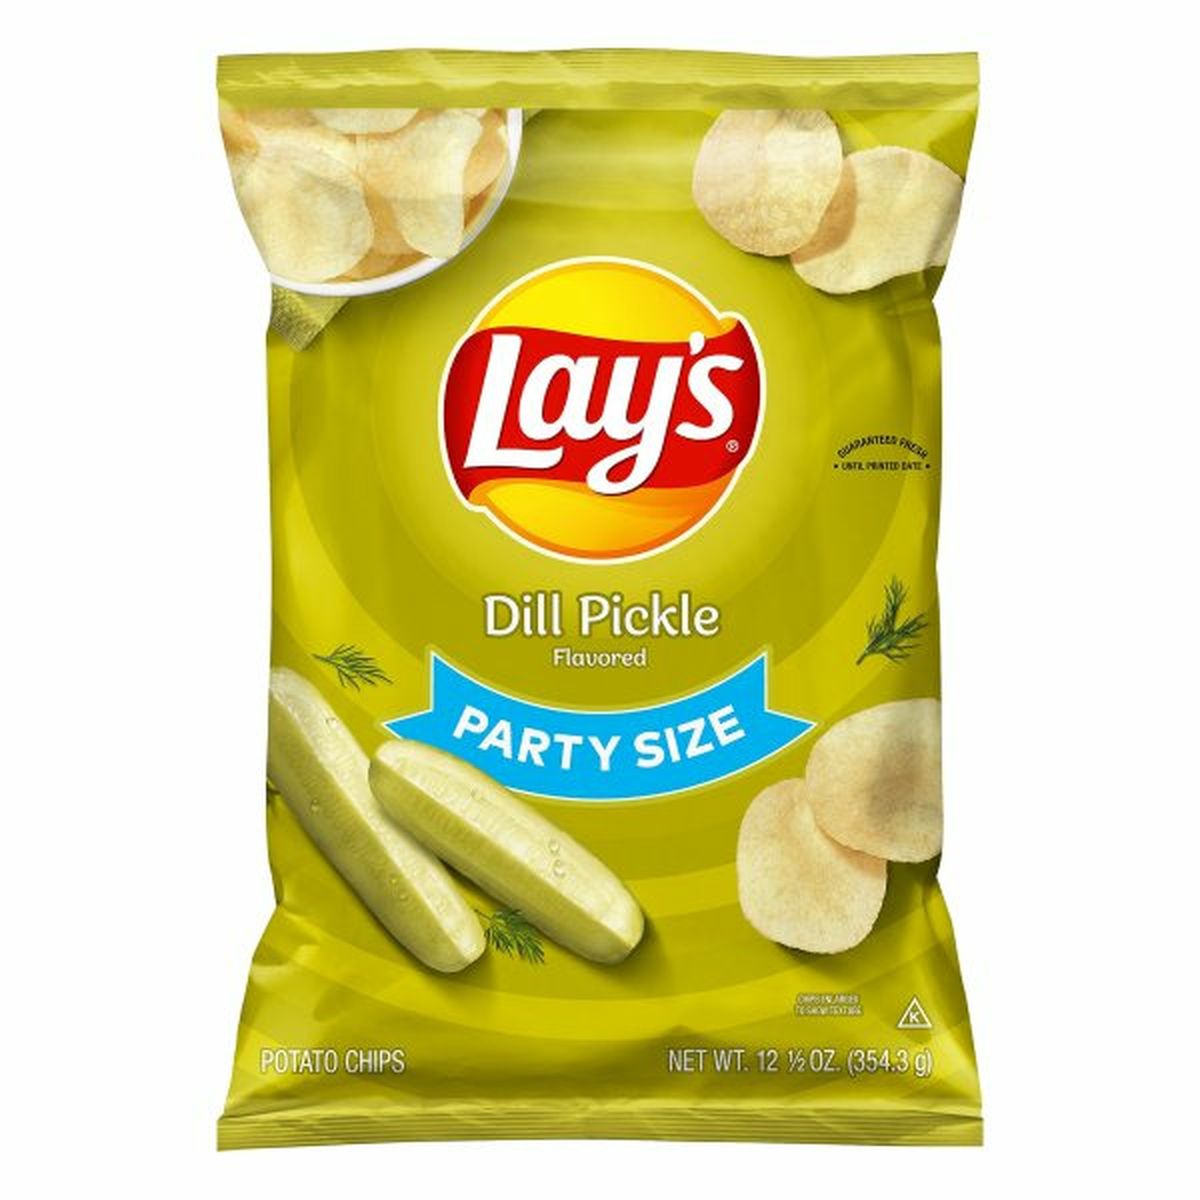 Calories in Lay's Potato Chips, Dill Pickle, Party Size